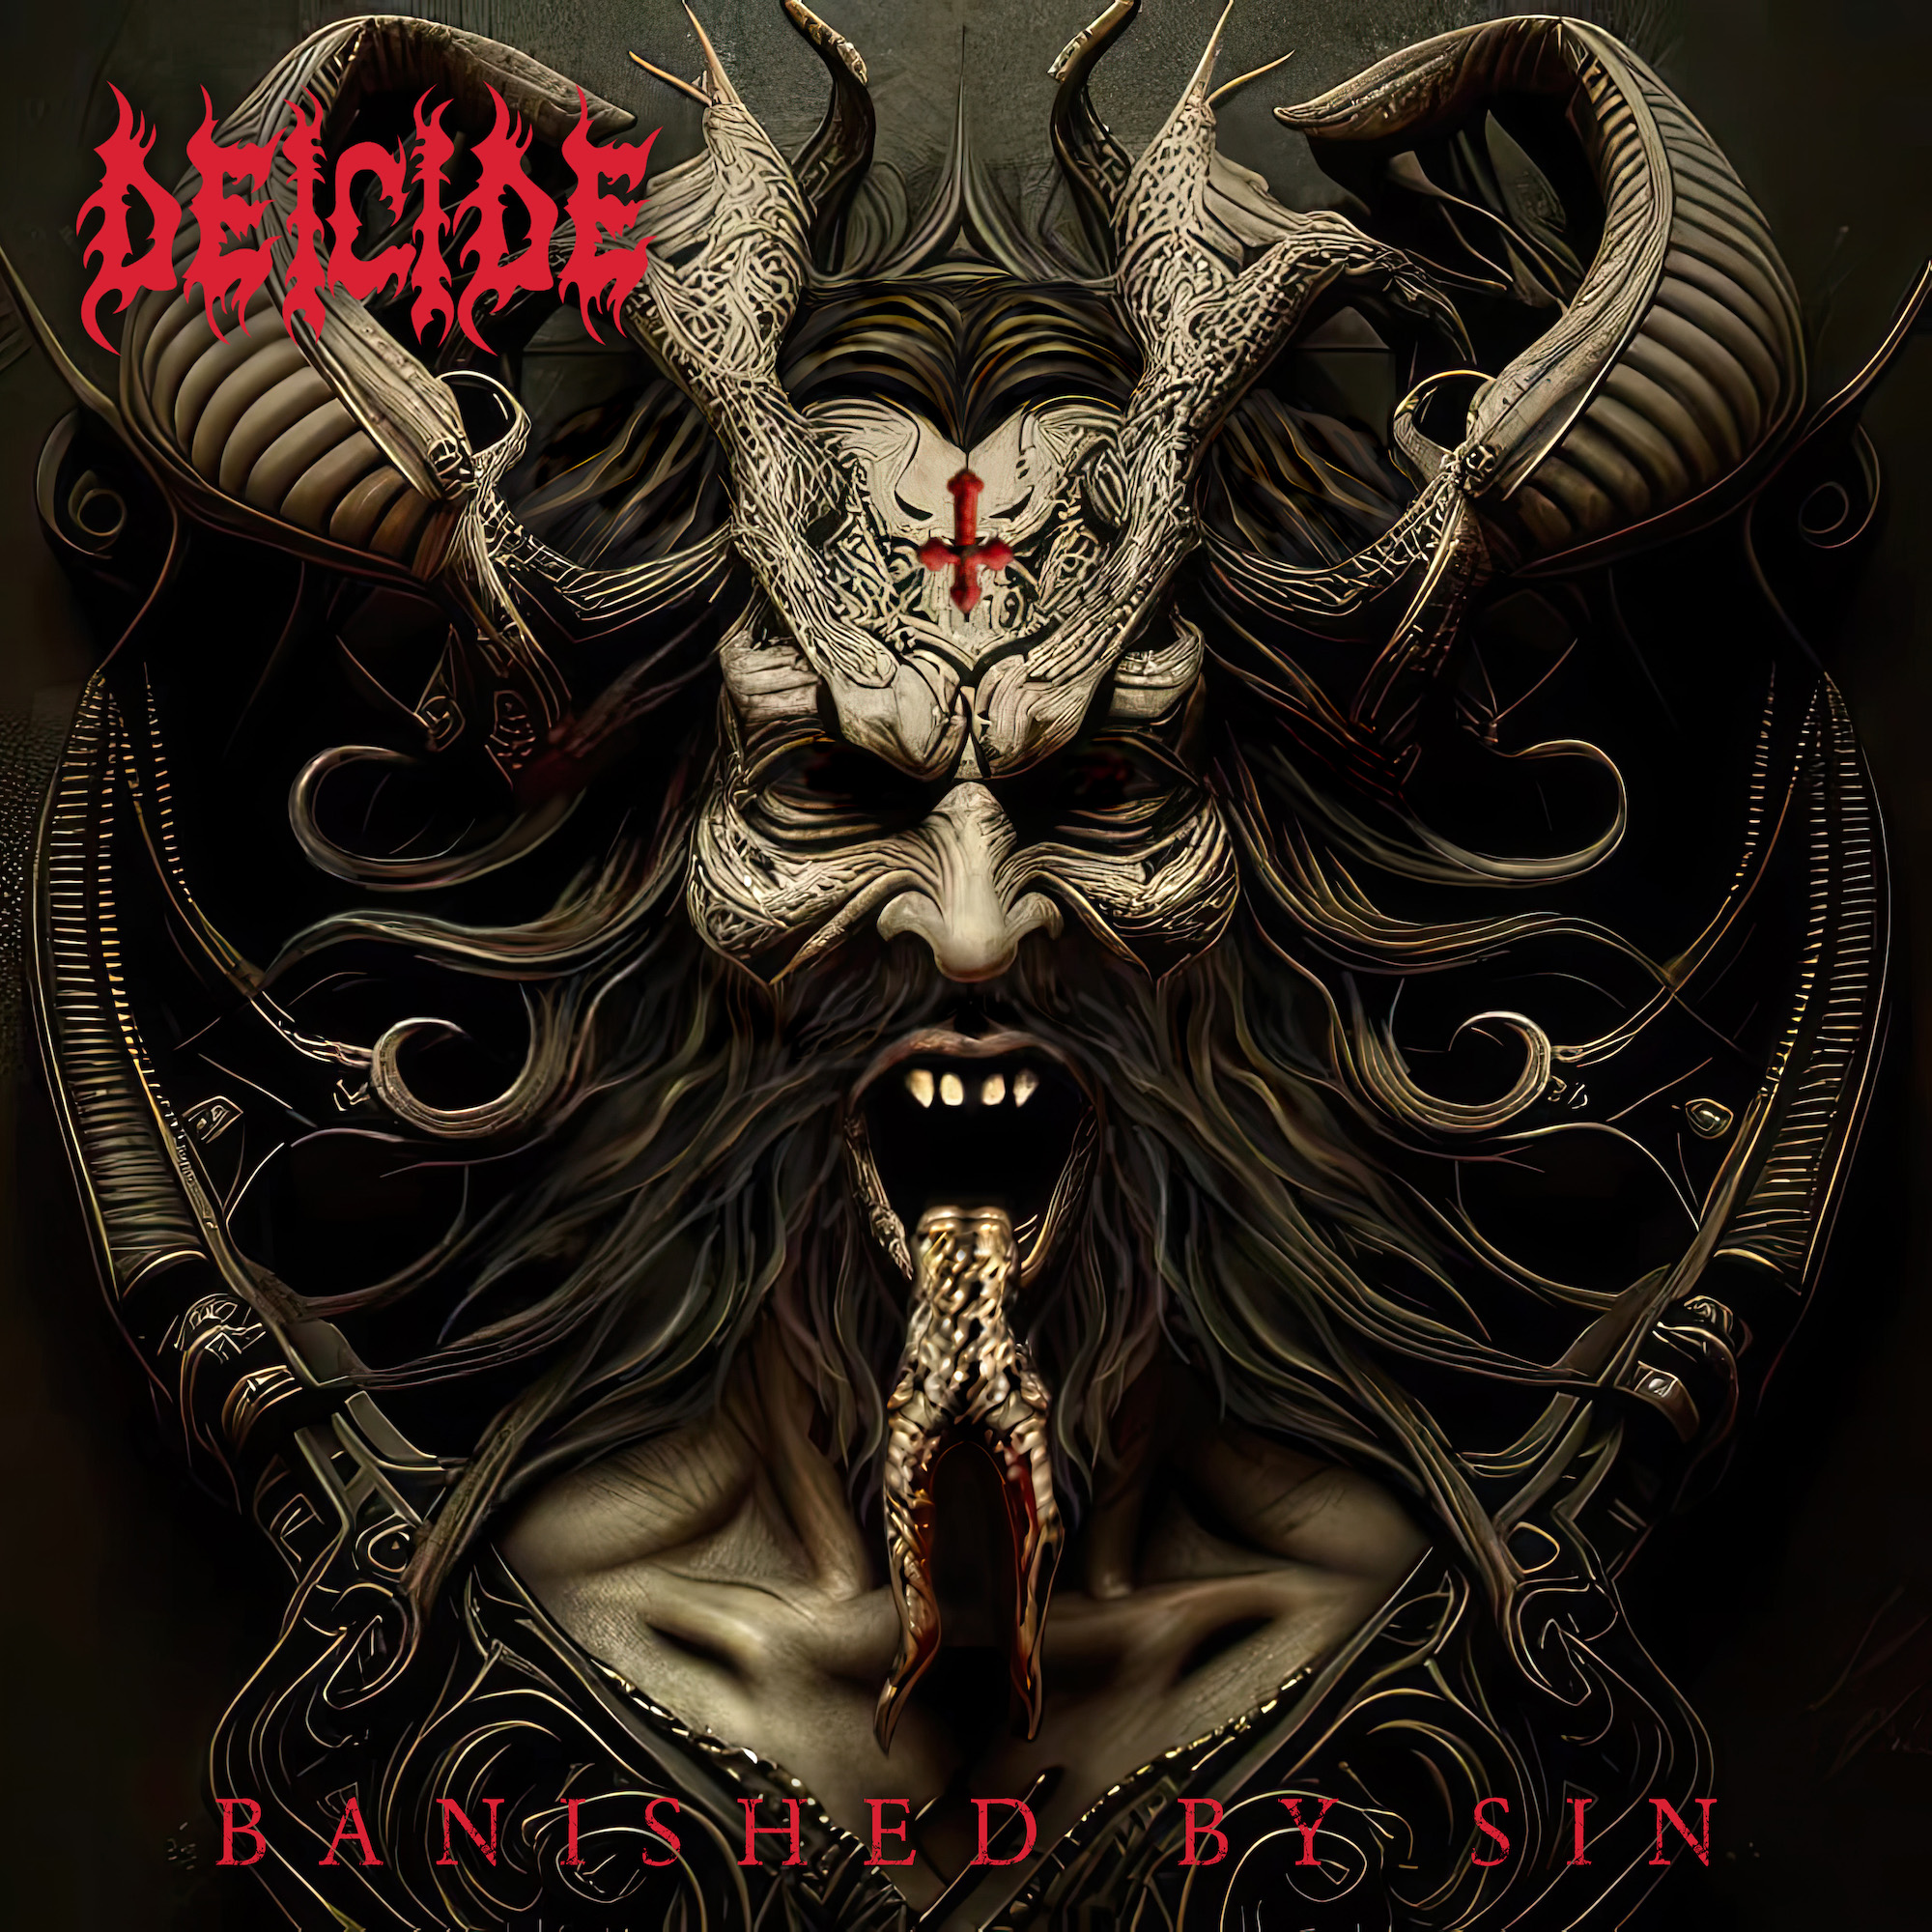 Deicide – Banished By Sin Album Review. A Brutal Return to Death Metal Glory